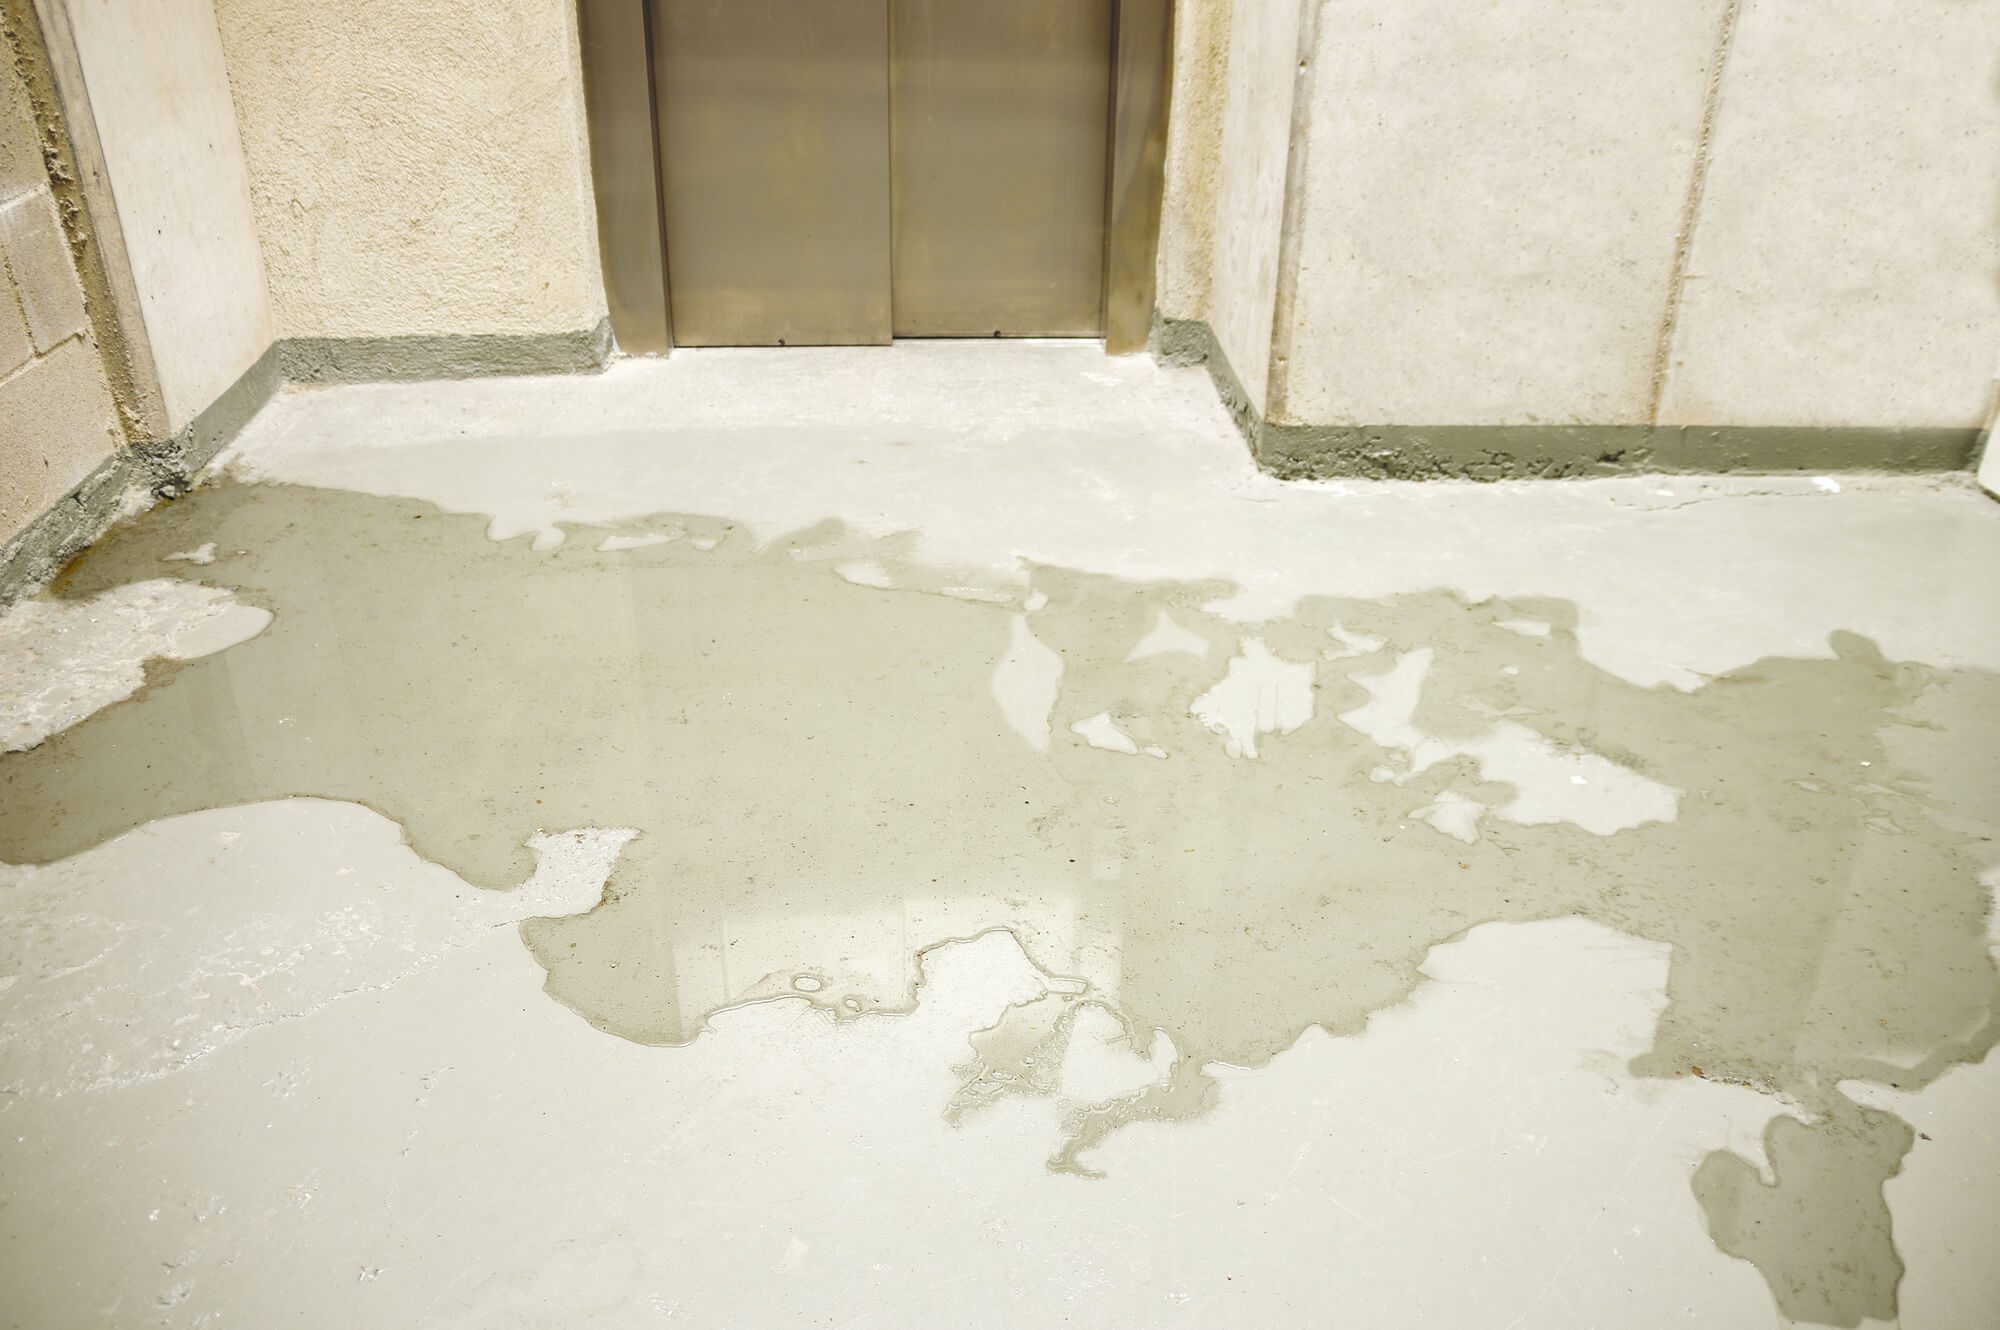 Early Slab Leak Detection Can Stop Significant Water Damage